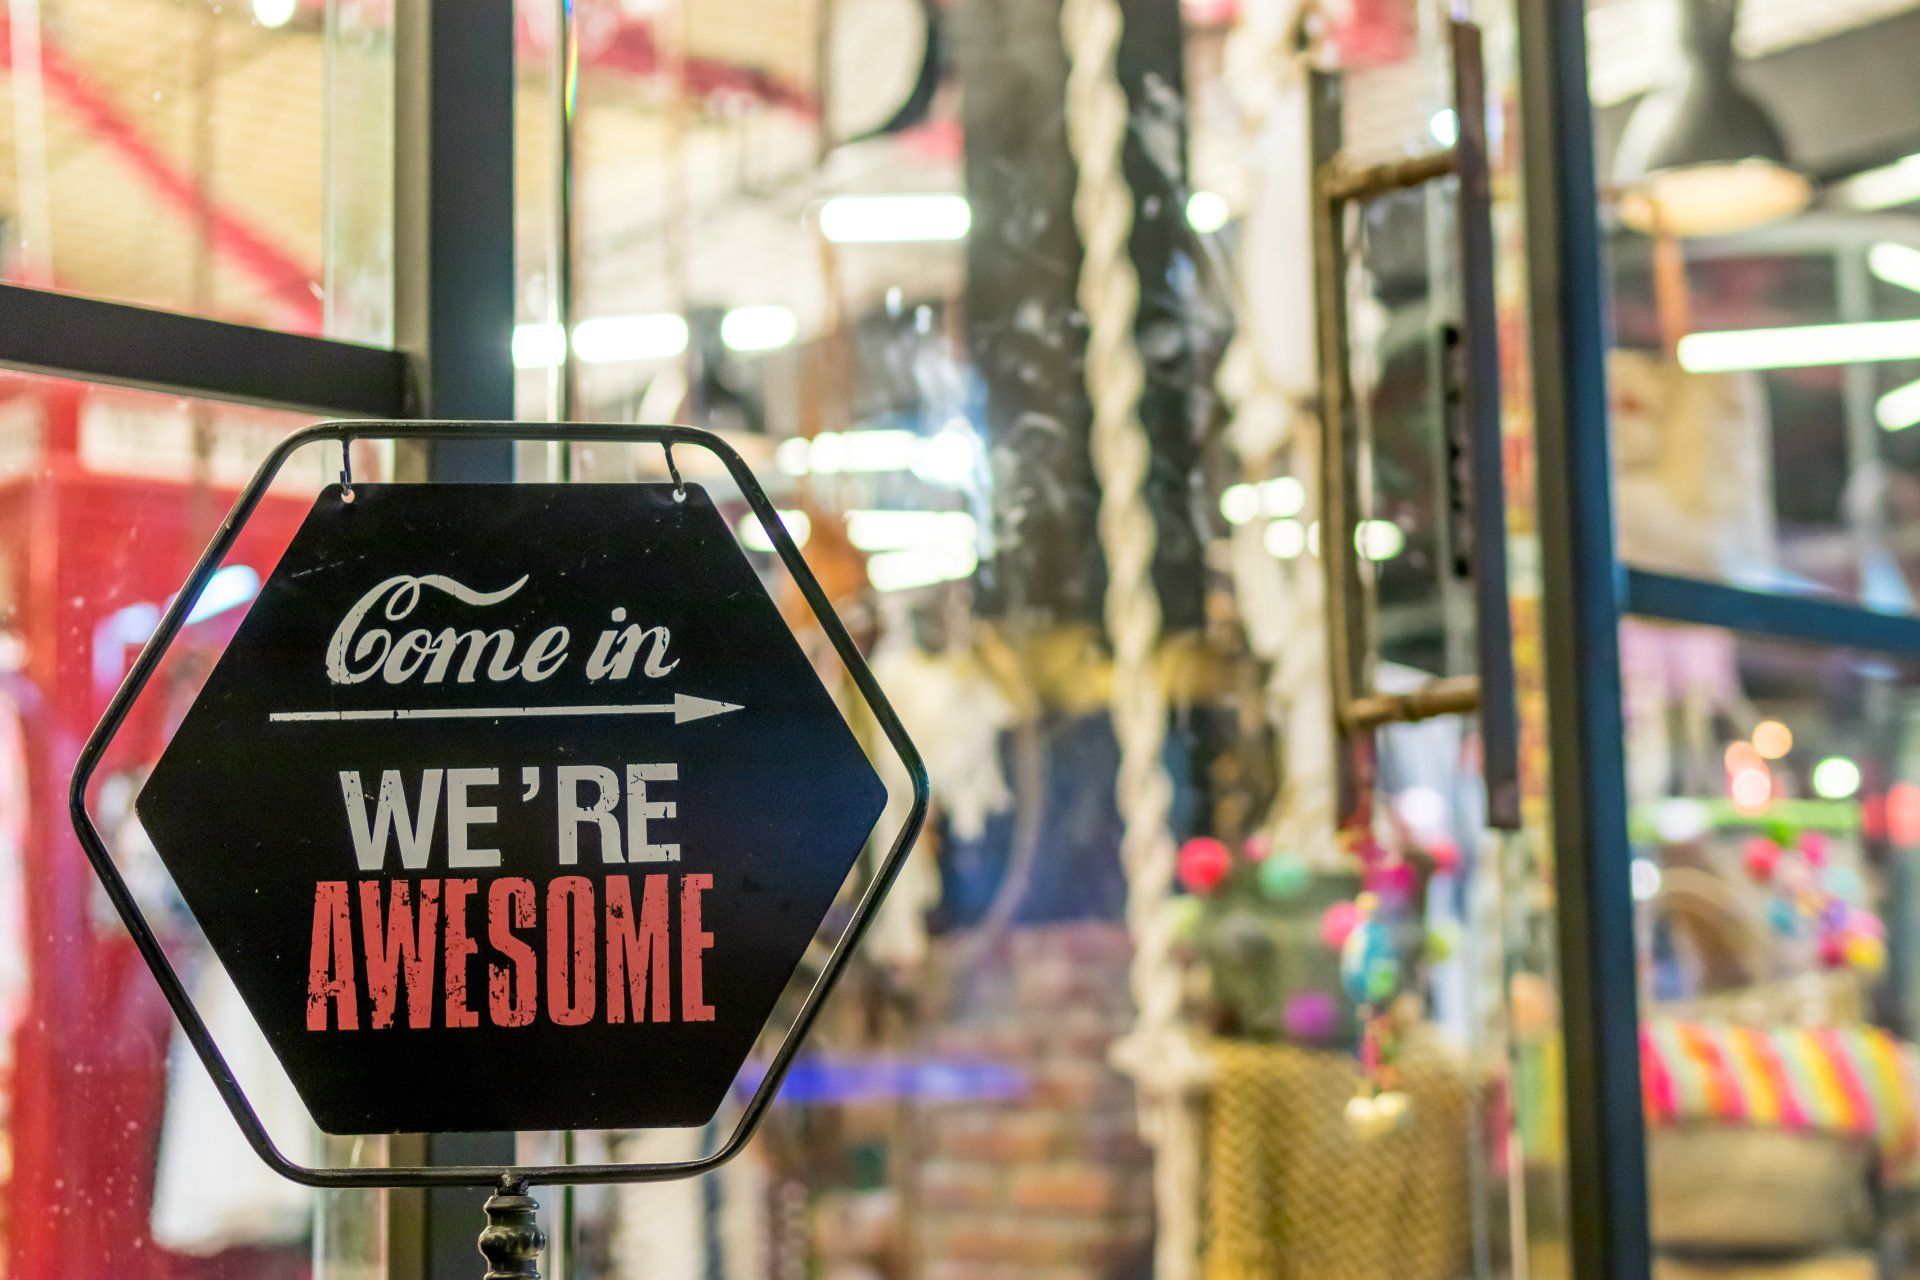 A sign that says `` come in we 're awesome '' is hanging in a store window.